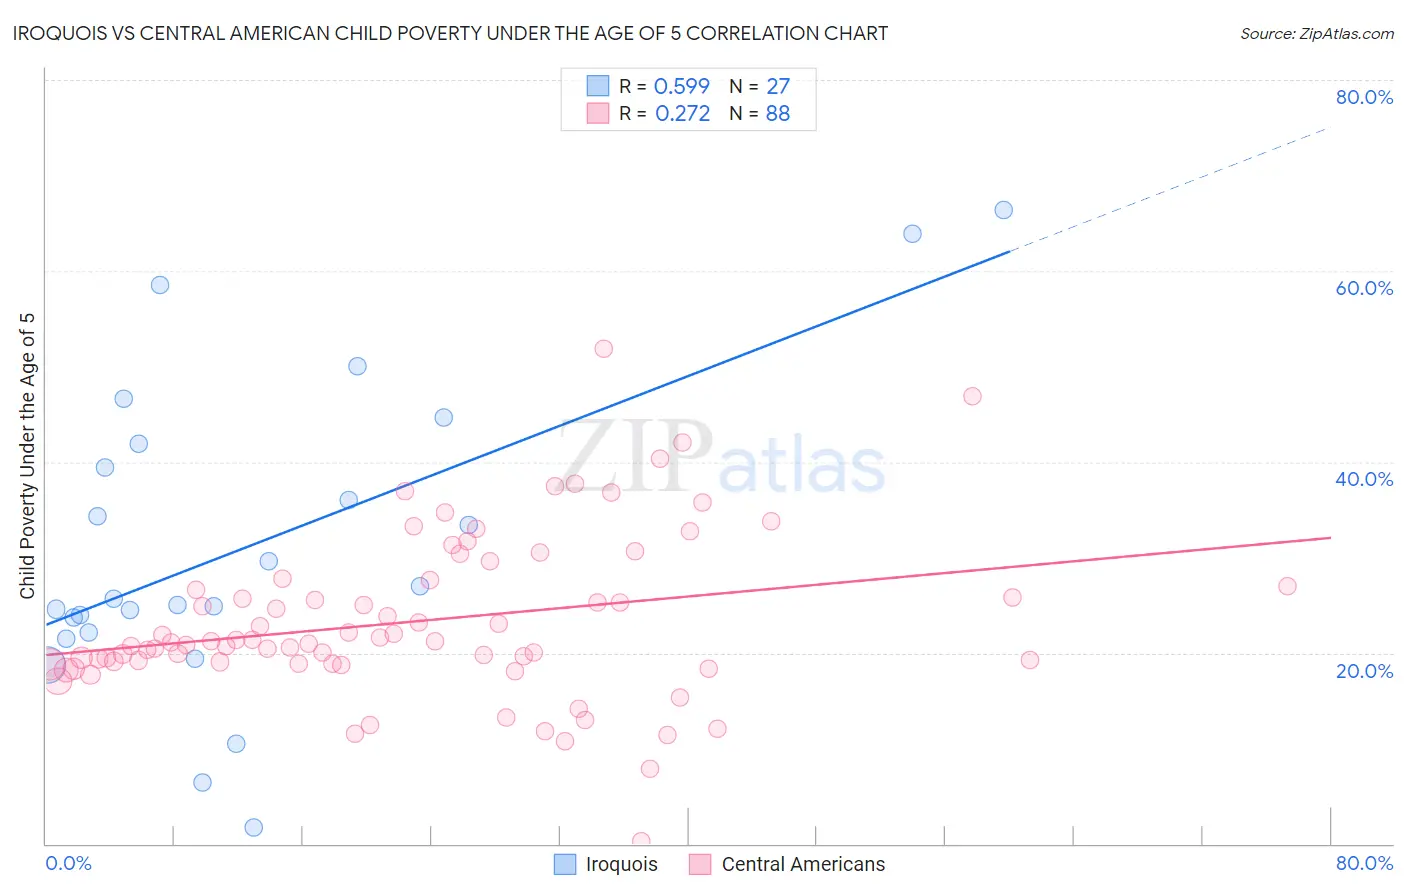 Iroquois vs Central American Child Poverty Under the Age of 5